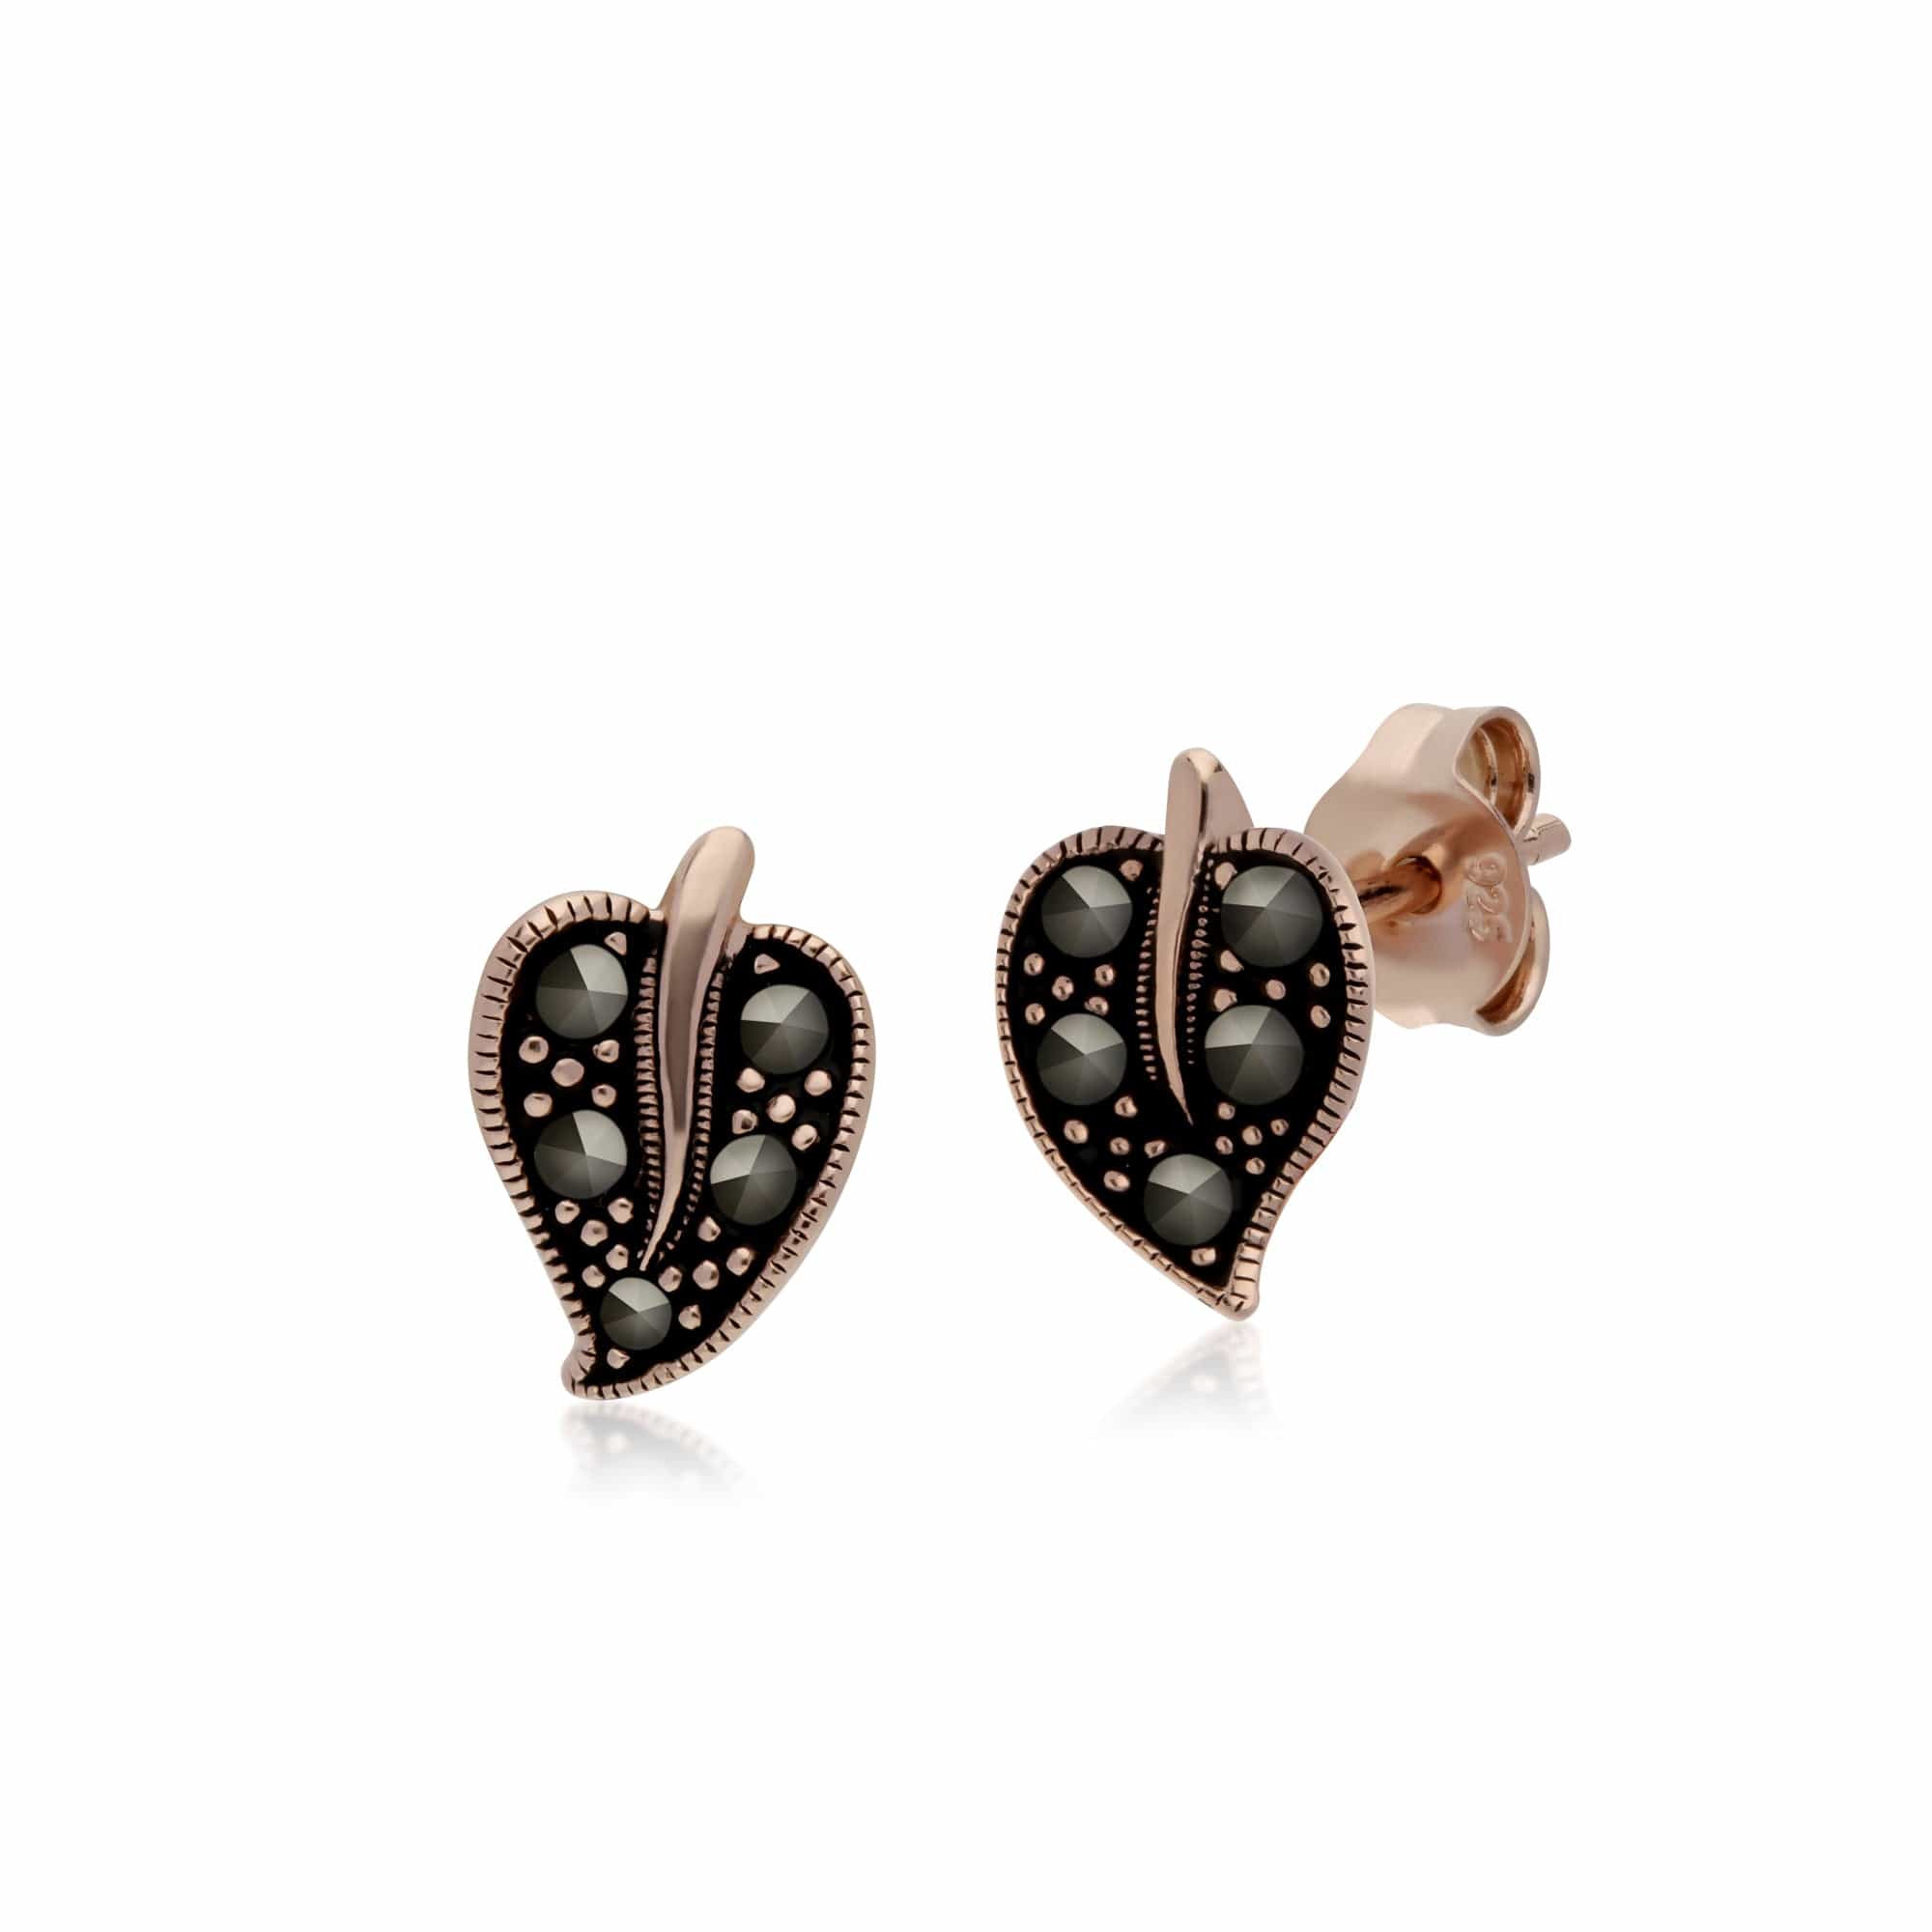 224E023401925-224R030501925 Rose Gold Plated Silver Marcasite Leaf Stud Earrings & Ring Set 2